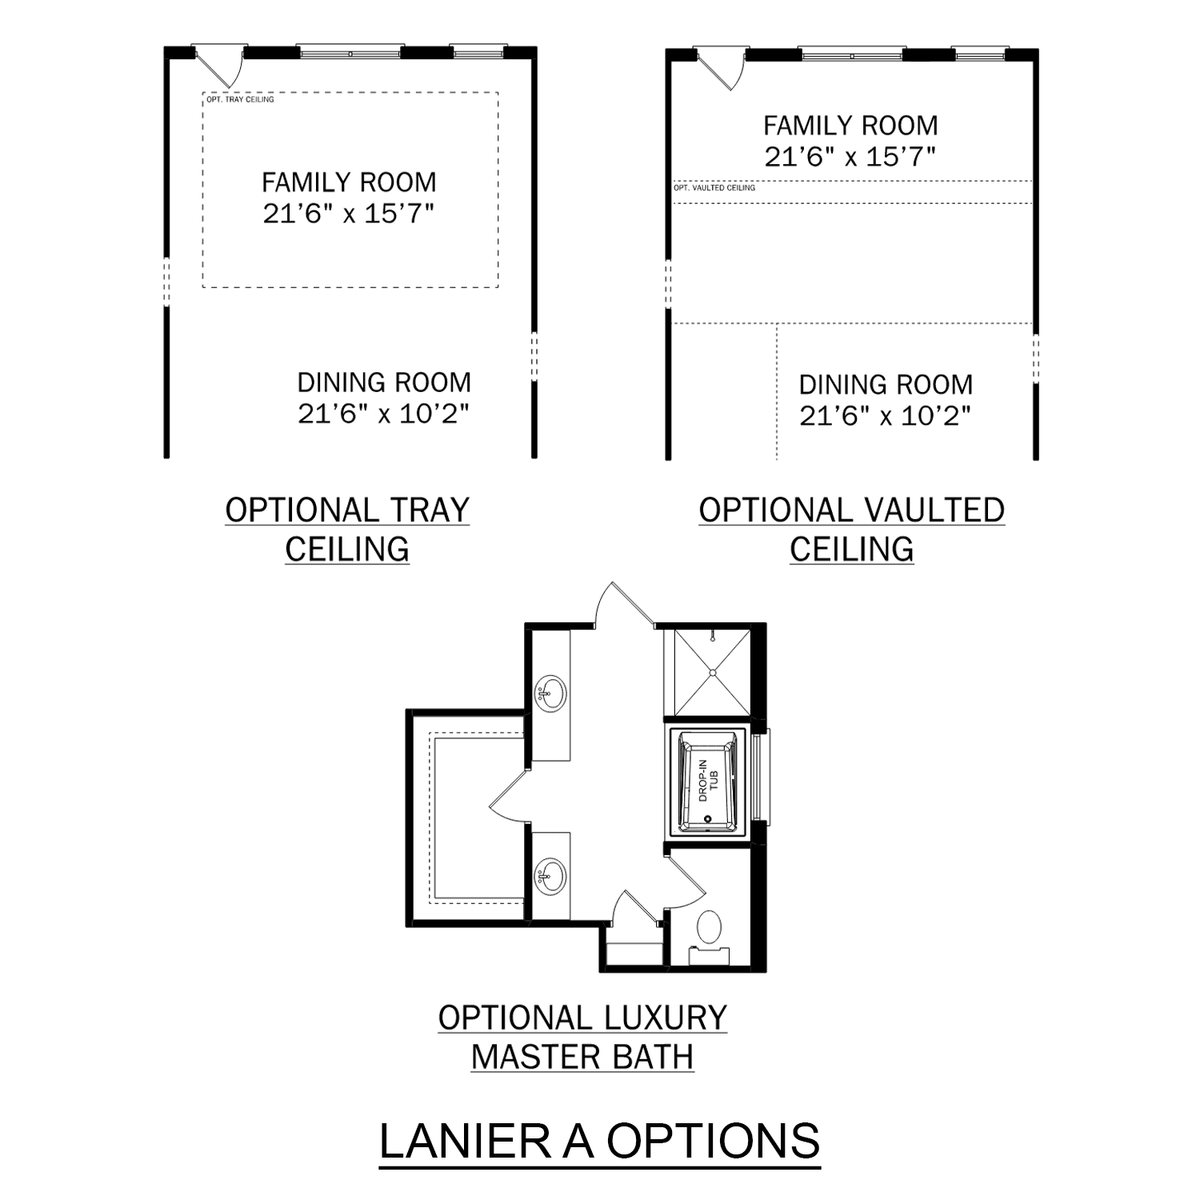 2 - The Lanier floor plan layout for 1910 Dawn Court in Davidson Homes' Cain Park community.